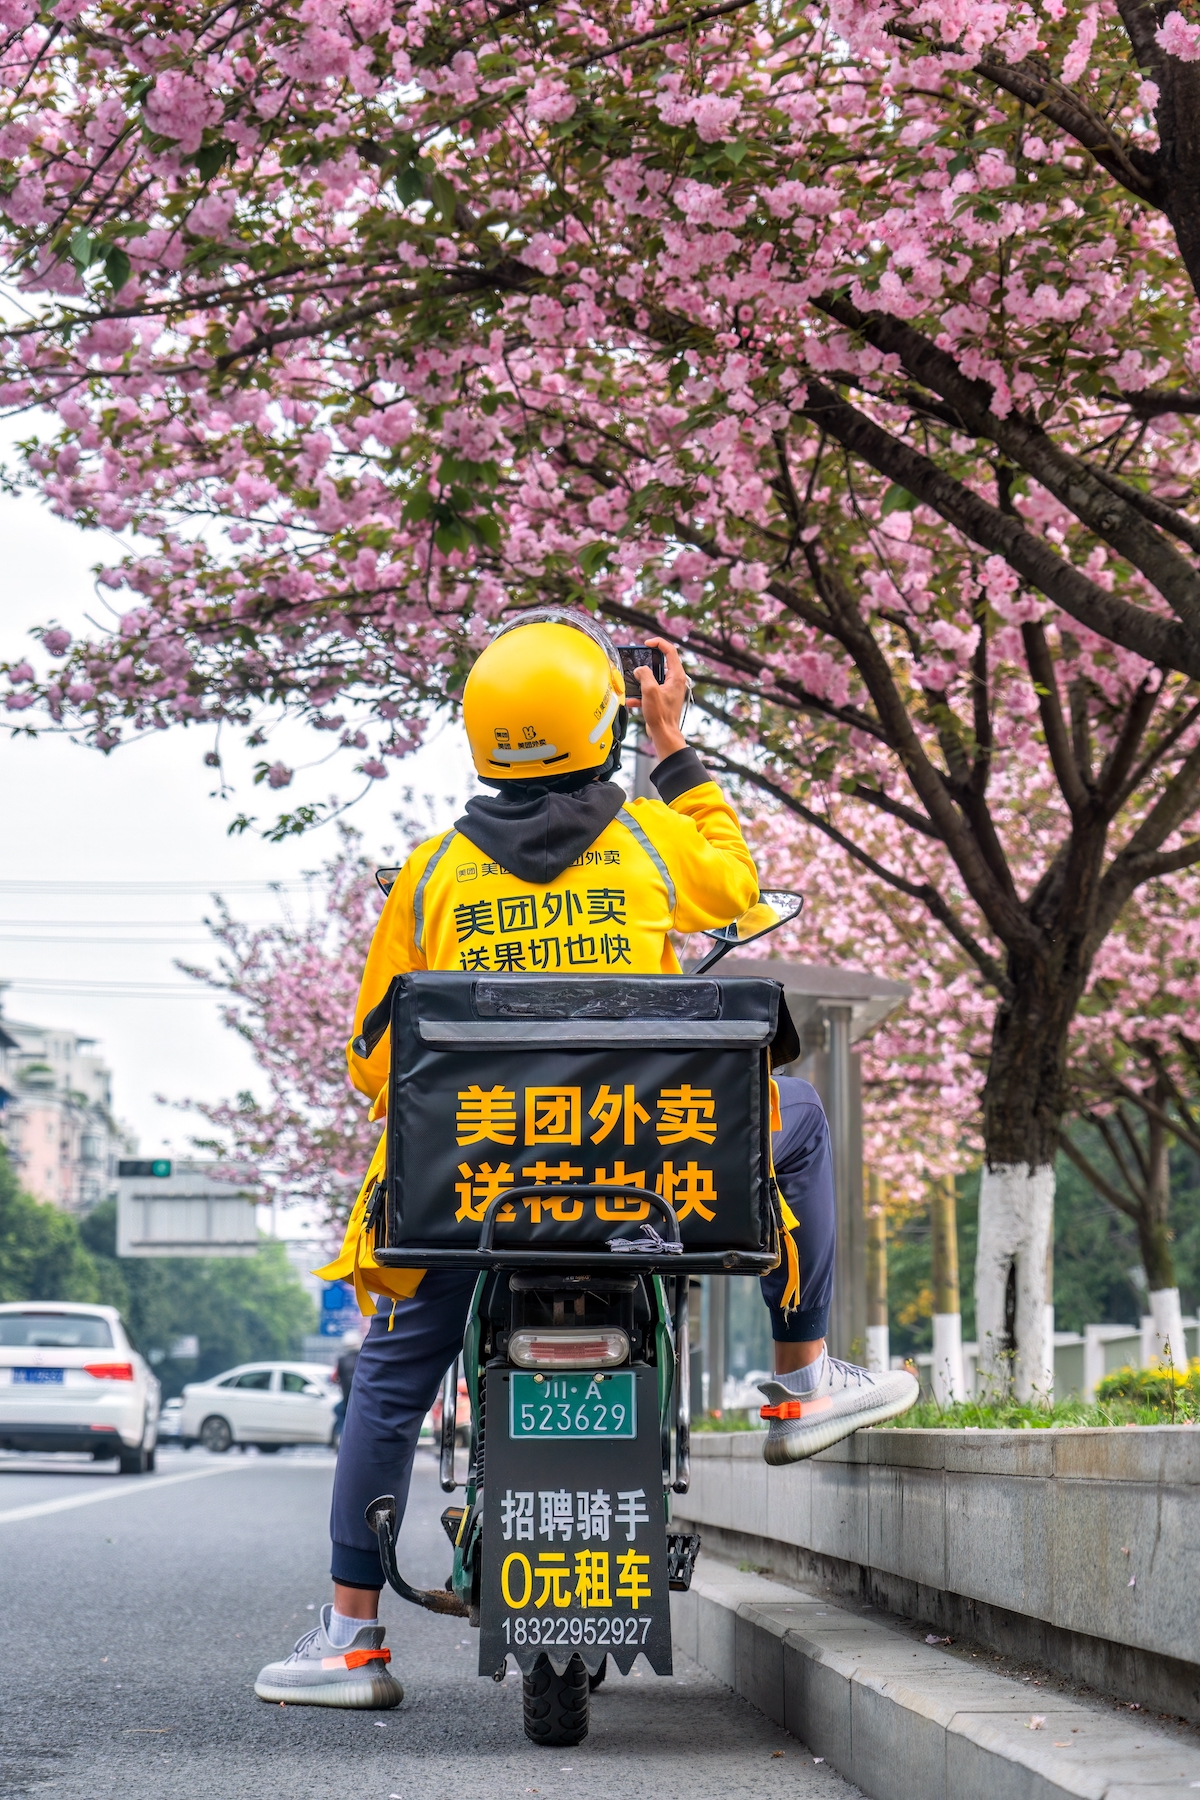 A Meituan driver rides on a street lined in flowering trees